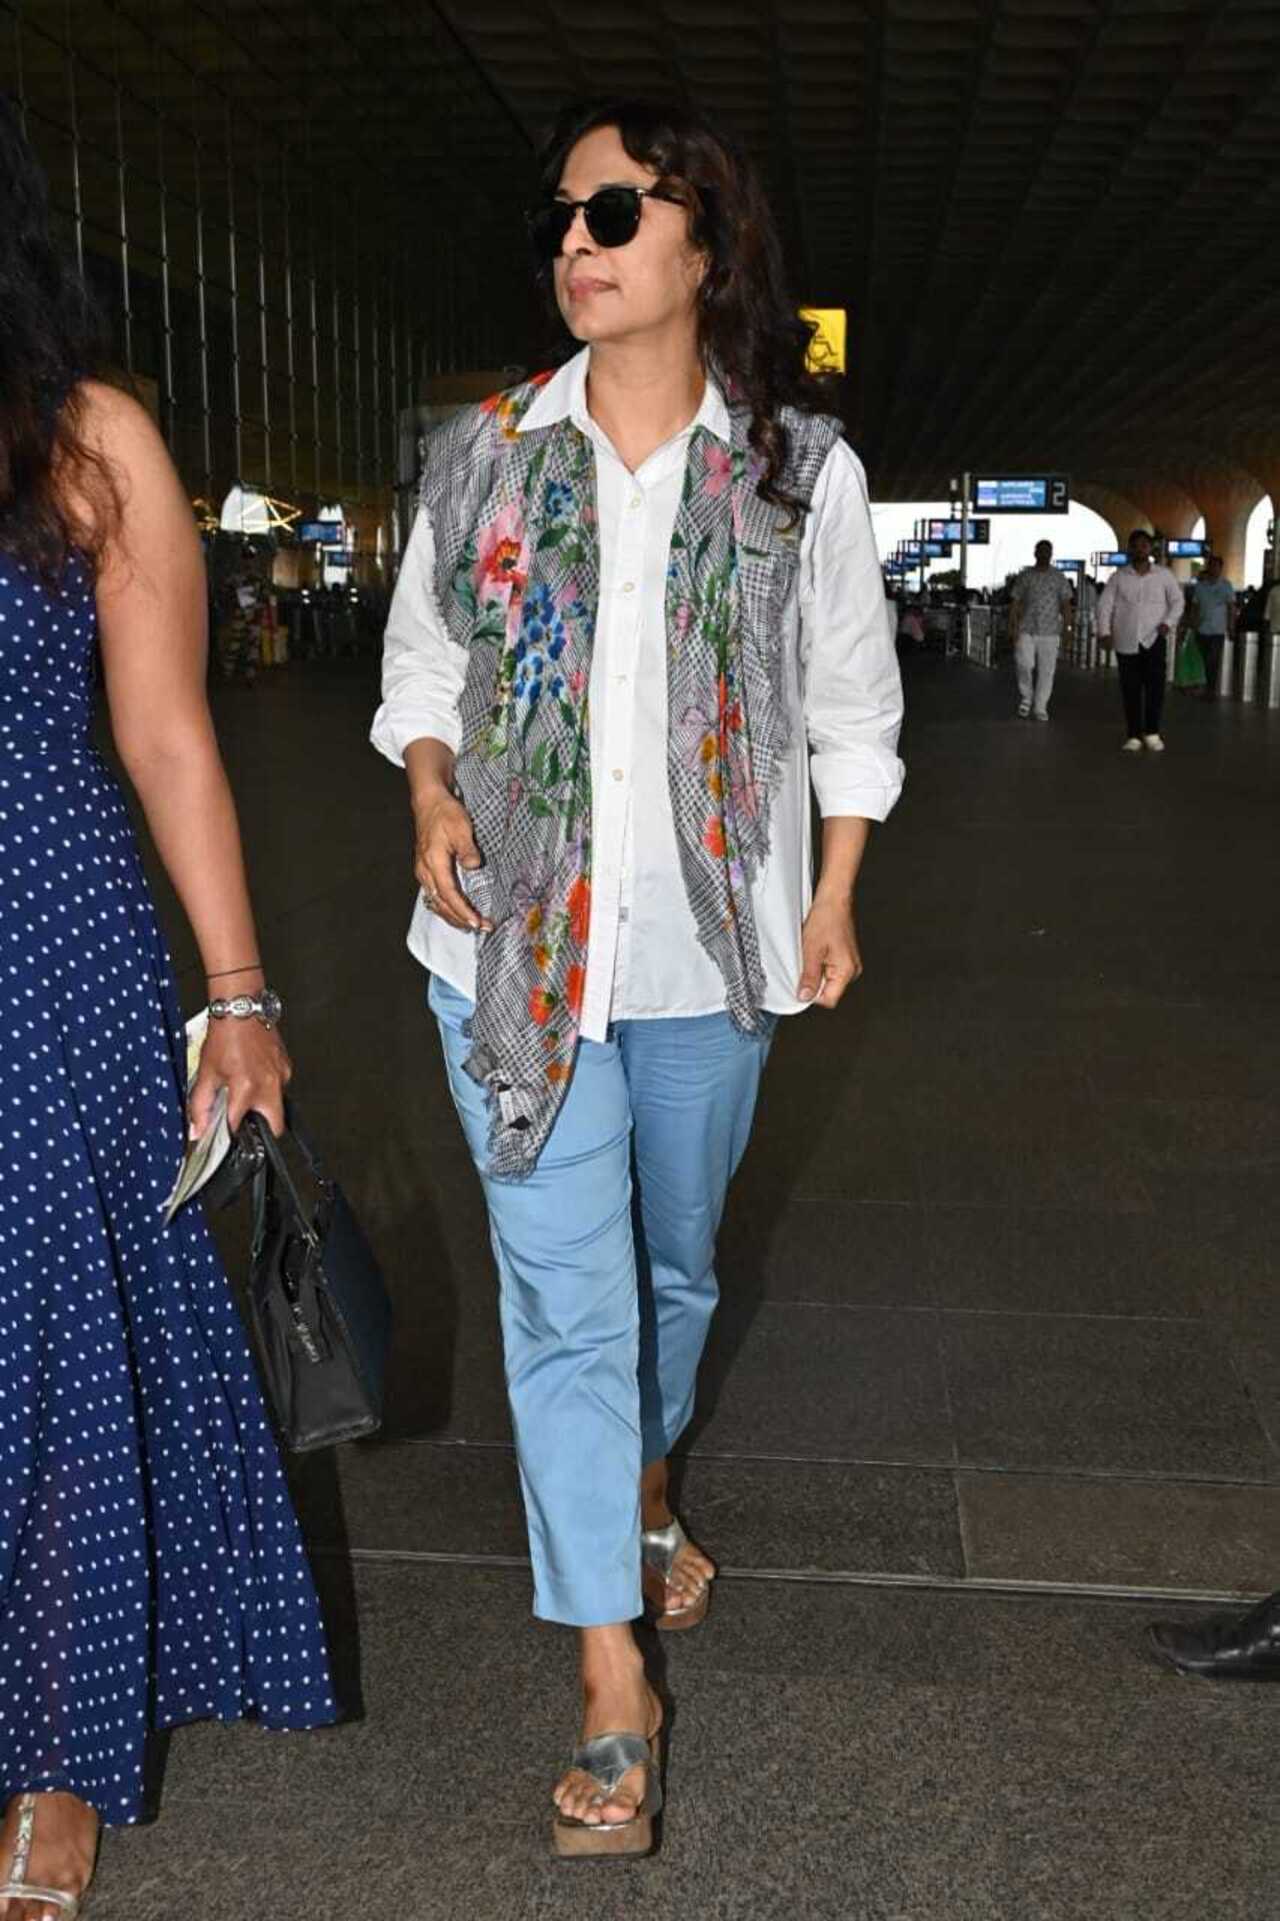 Juhi Chawla opted for a smart white shirt and blue jeans. The actress completed her airport look with putting a printed scarf around her neck